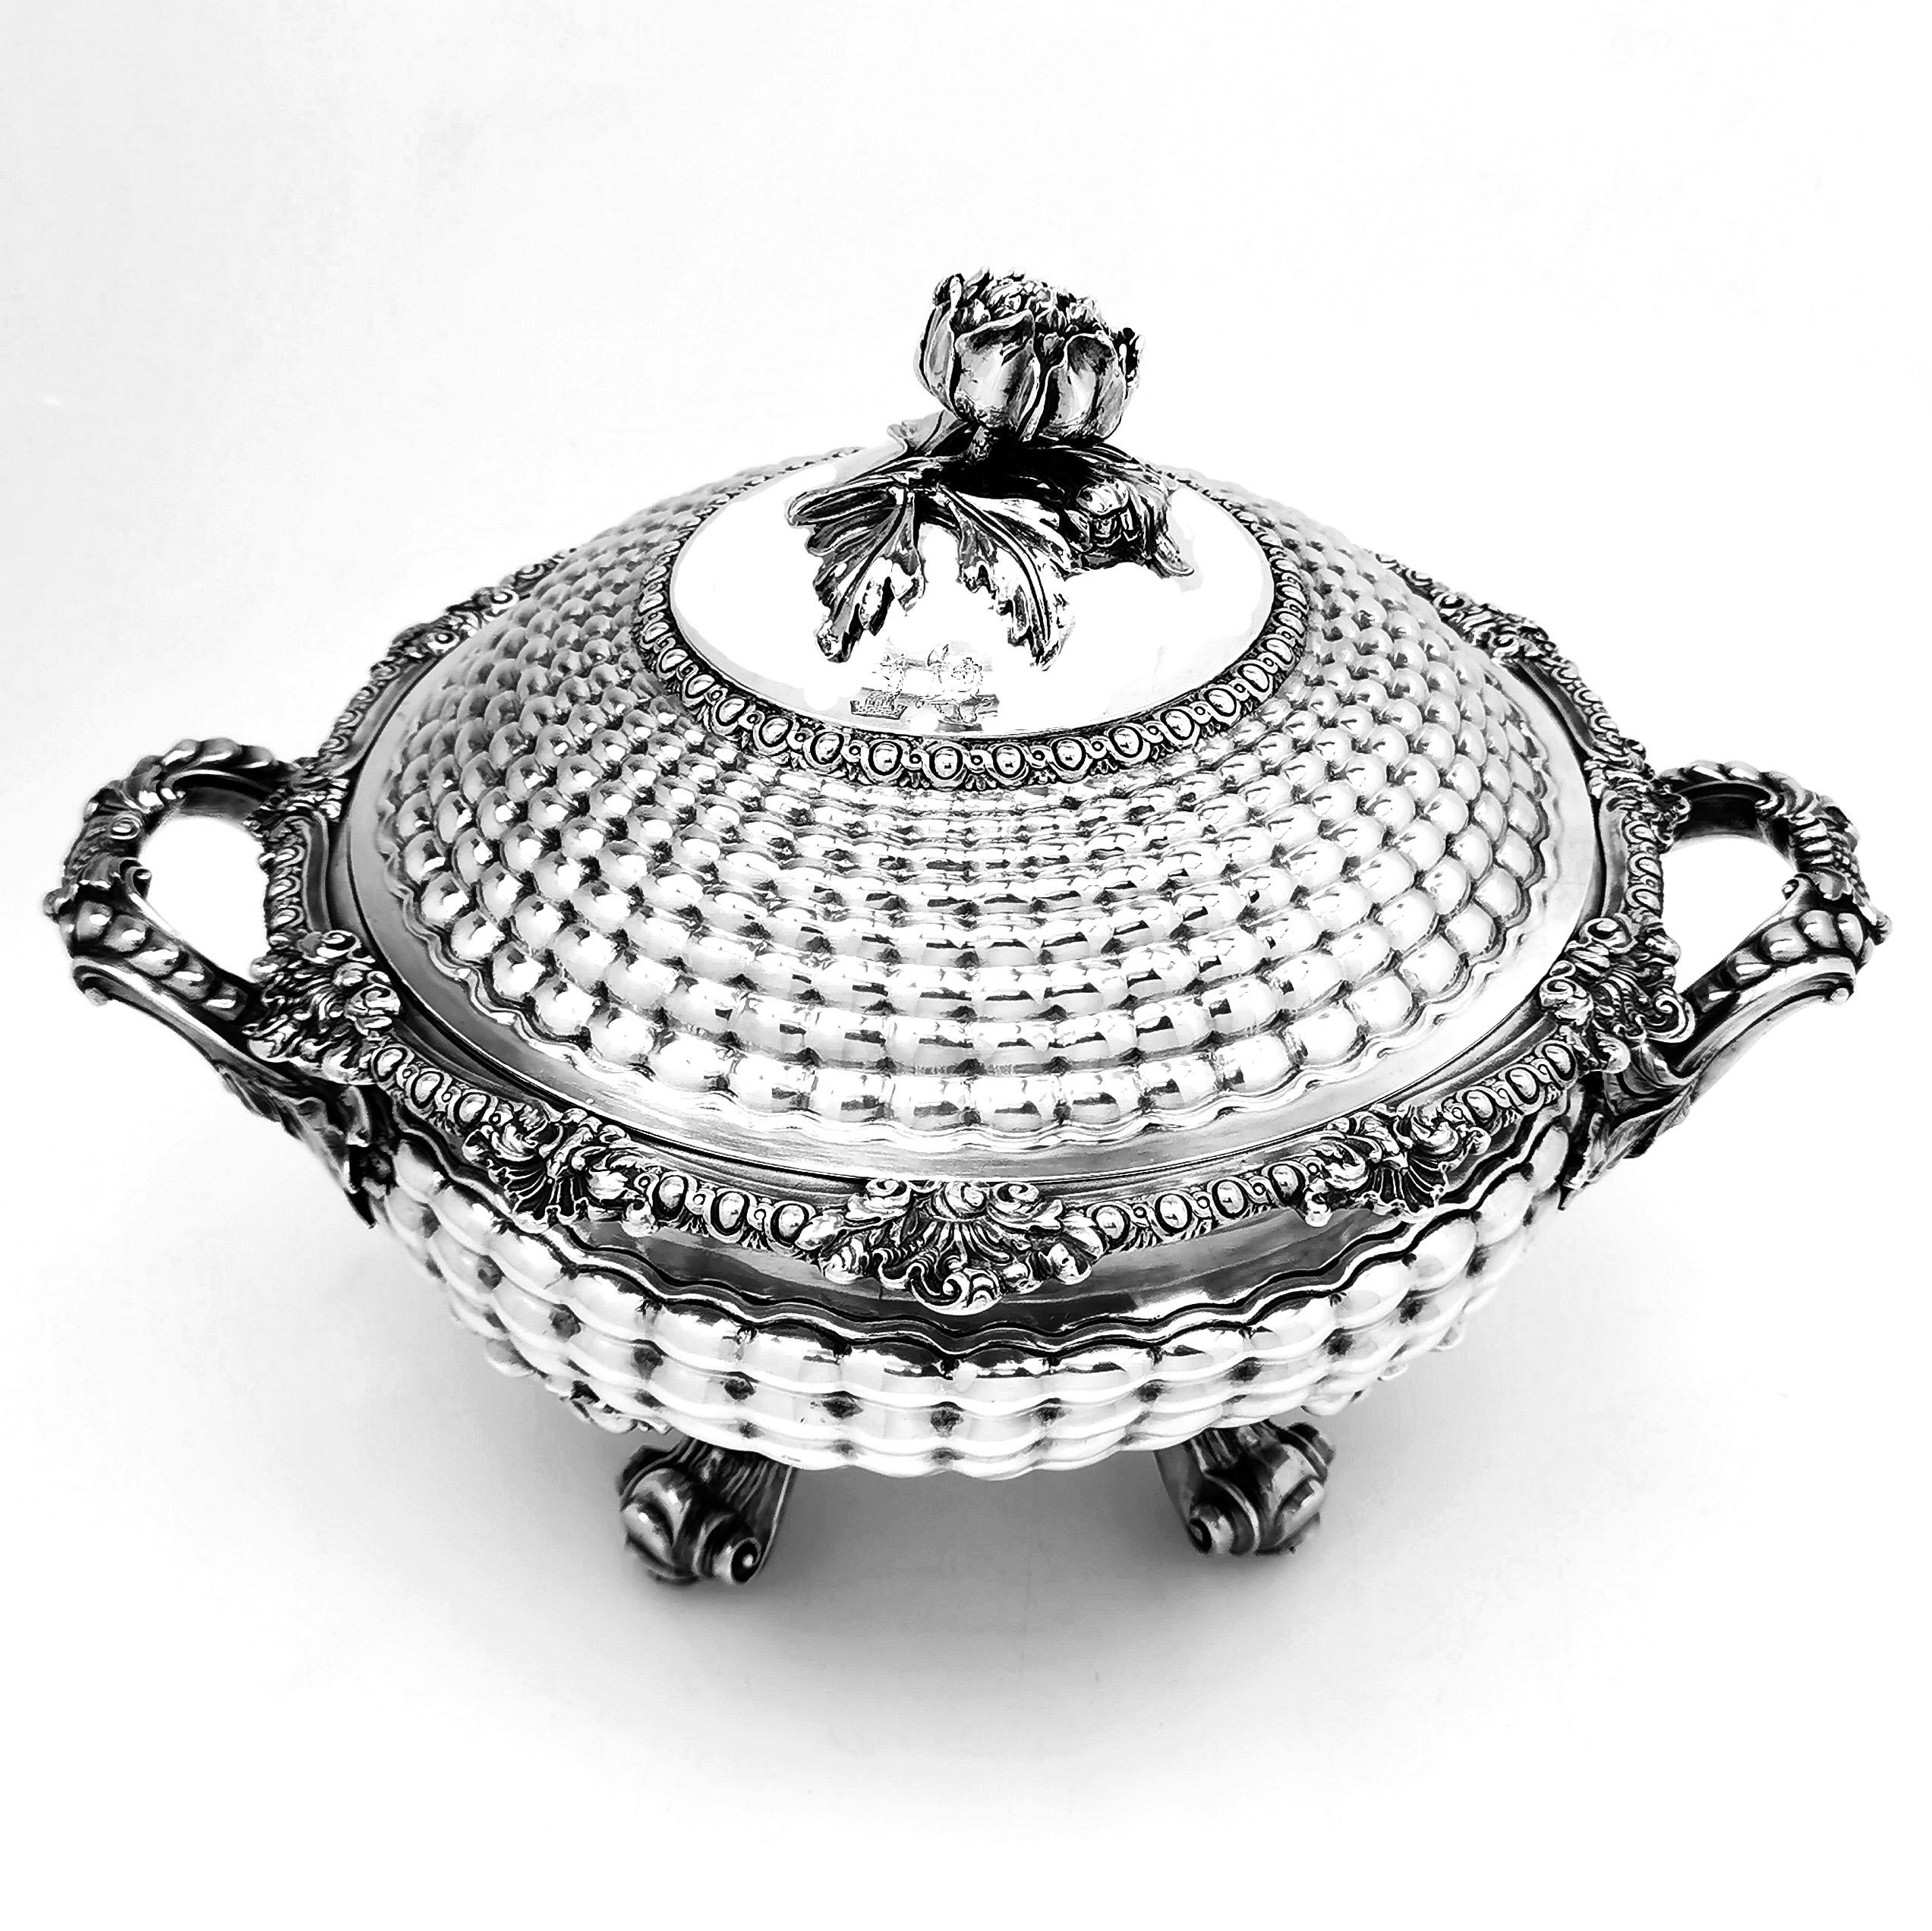 A magnificent antique George IV solid Silver Soup Tureen with an elegant chased quilted design. This round Silver Serving Tureen has Rococo elements perfectly accenting the quilted pattern on the body, with bold shell handles and a shell pattern